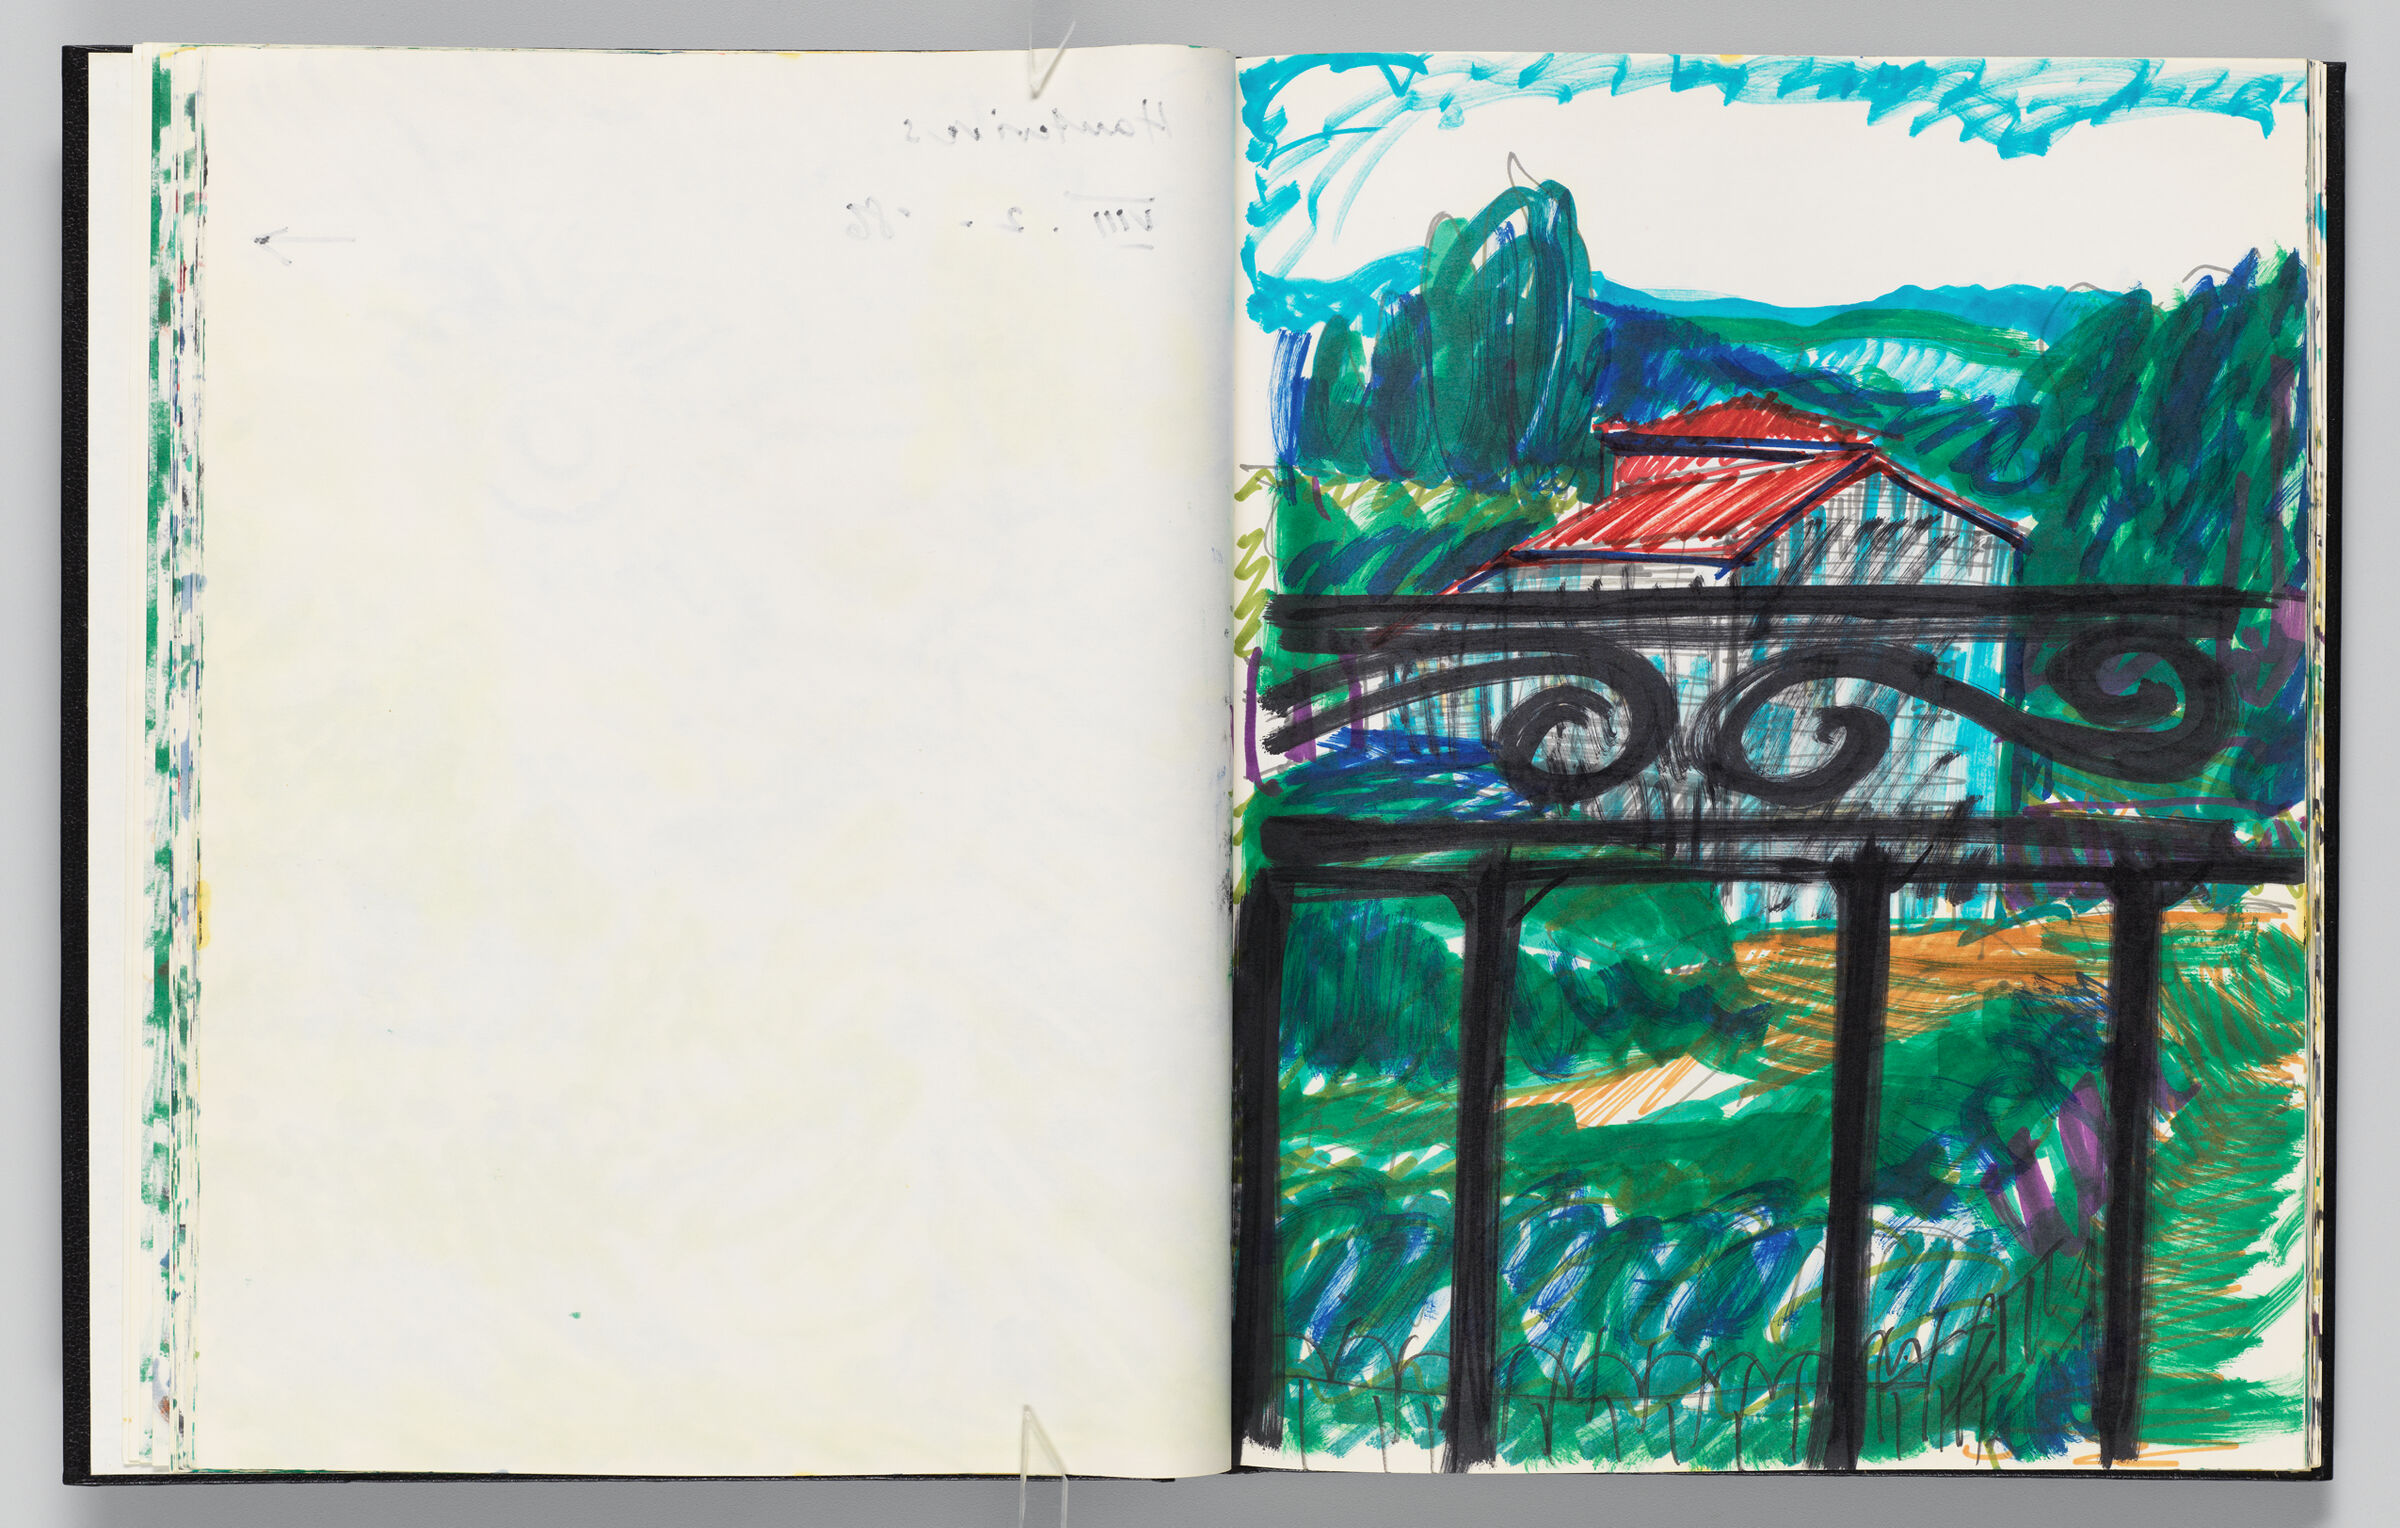 Untitled (Bleed-Through Of Previous Page, Left Page); Untitled (Landscape And House Through Iron Fence, Right Page)